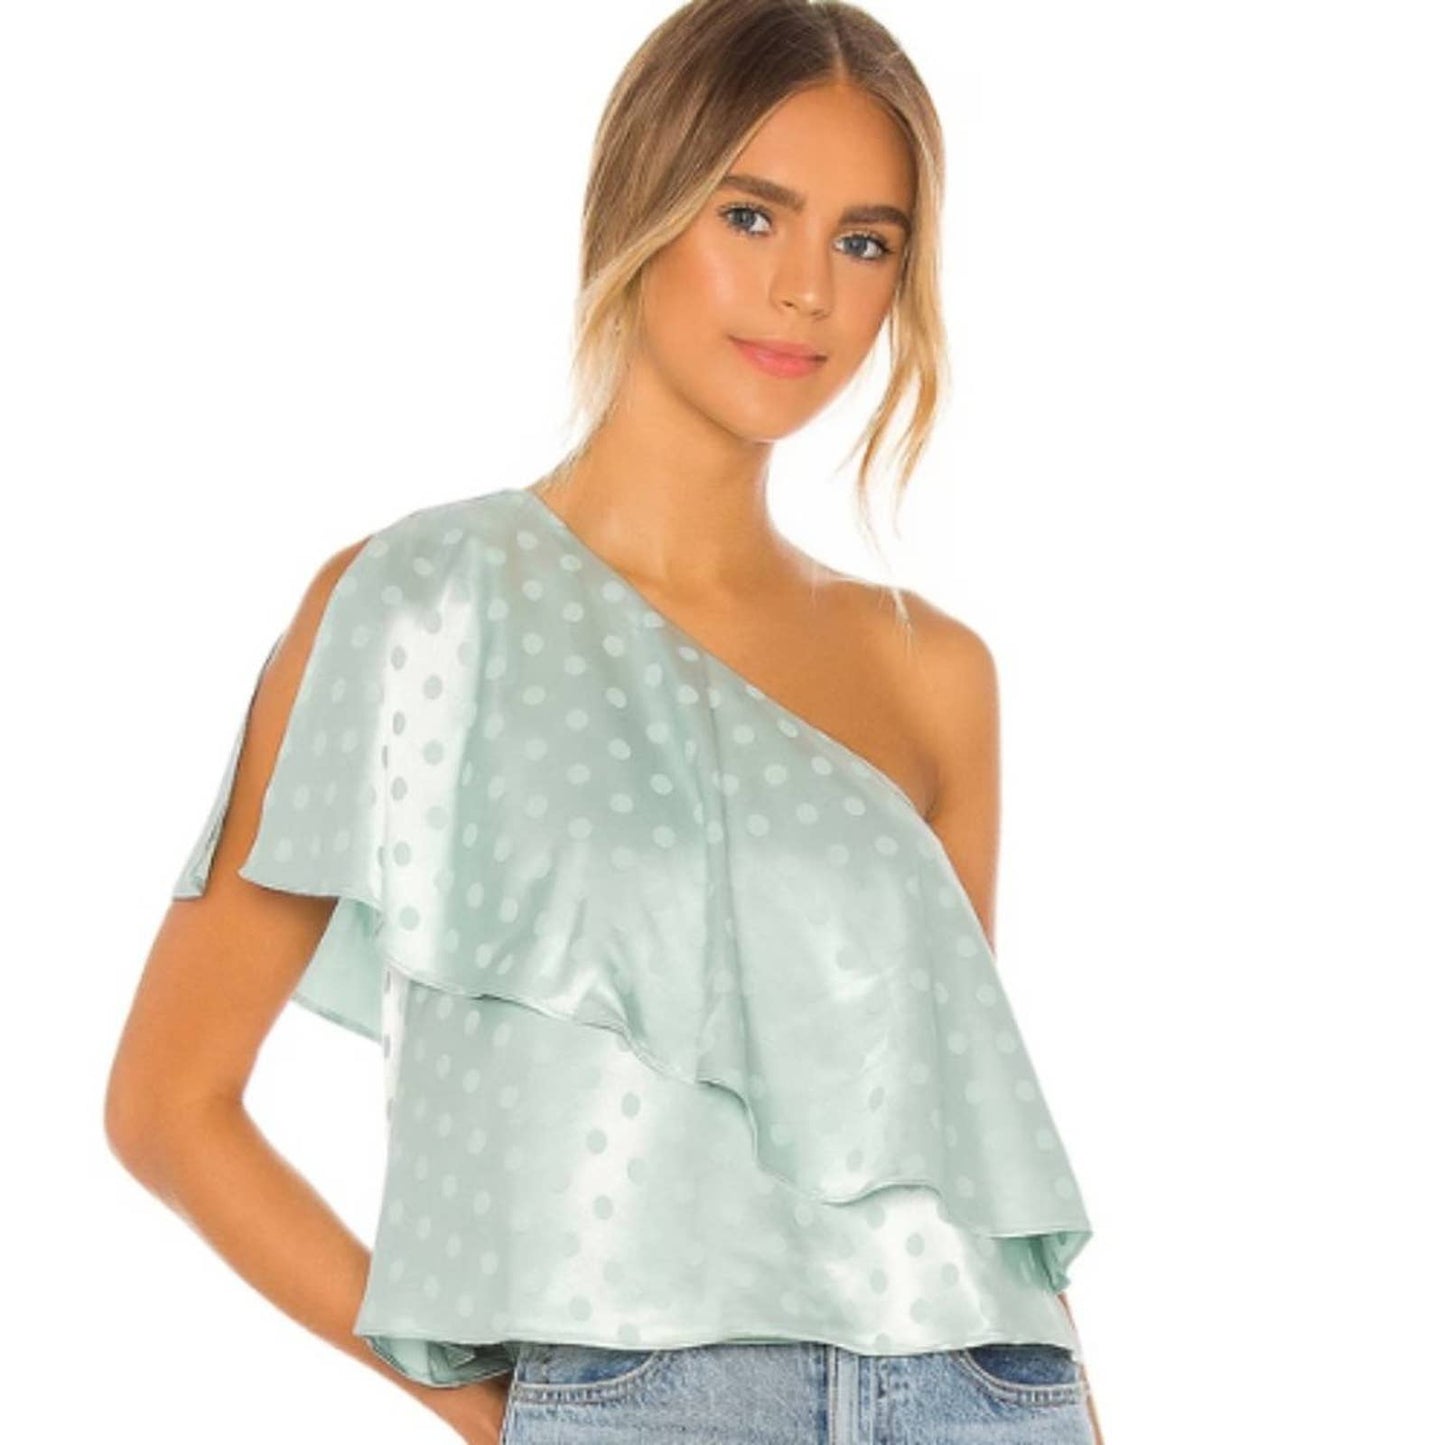 House of Harlow 1960 x REVOLVE Leya Top in Mint NWT Size Small